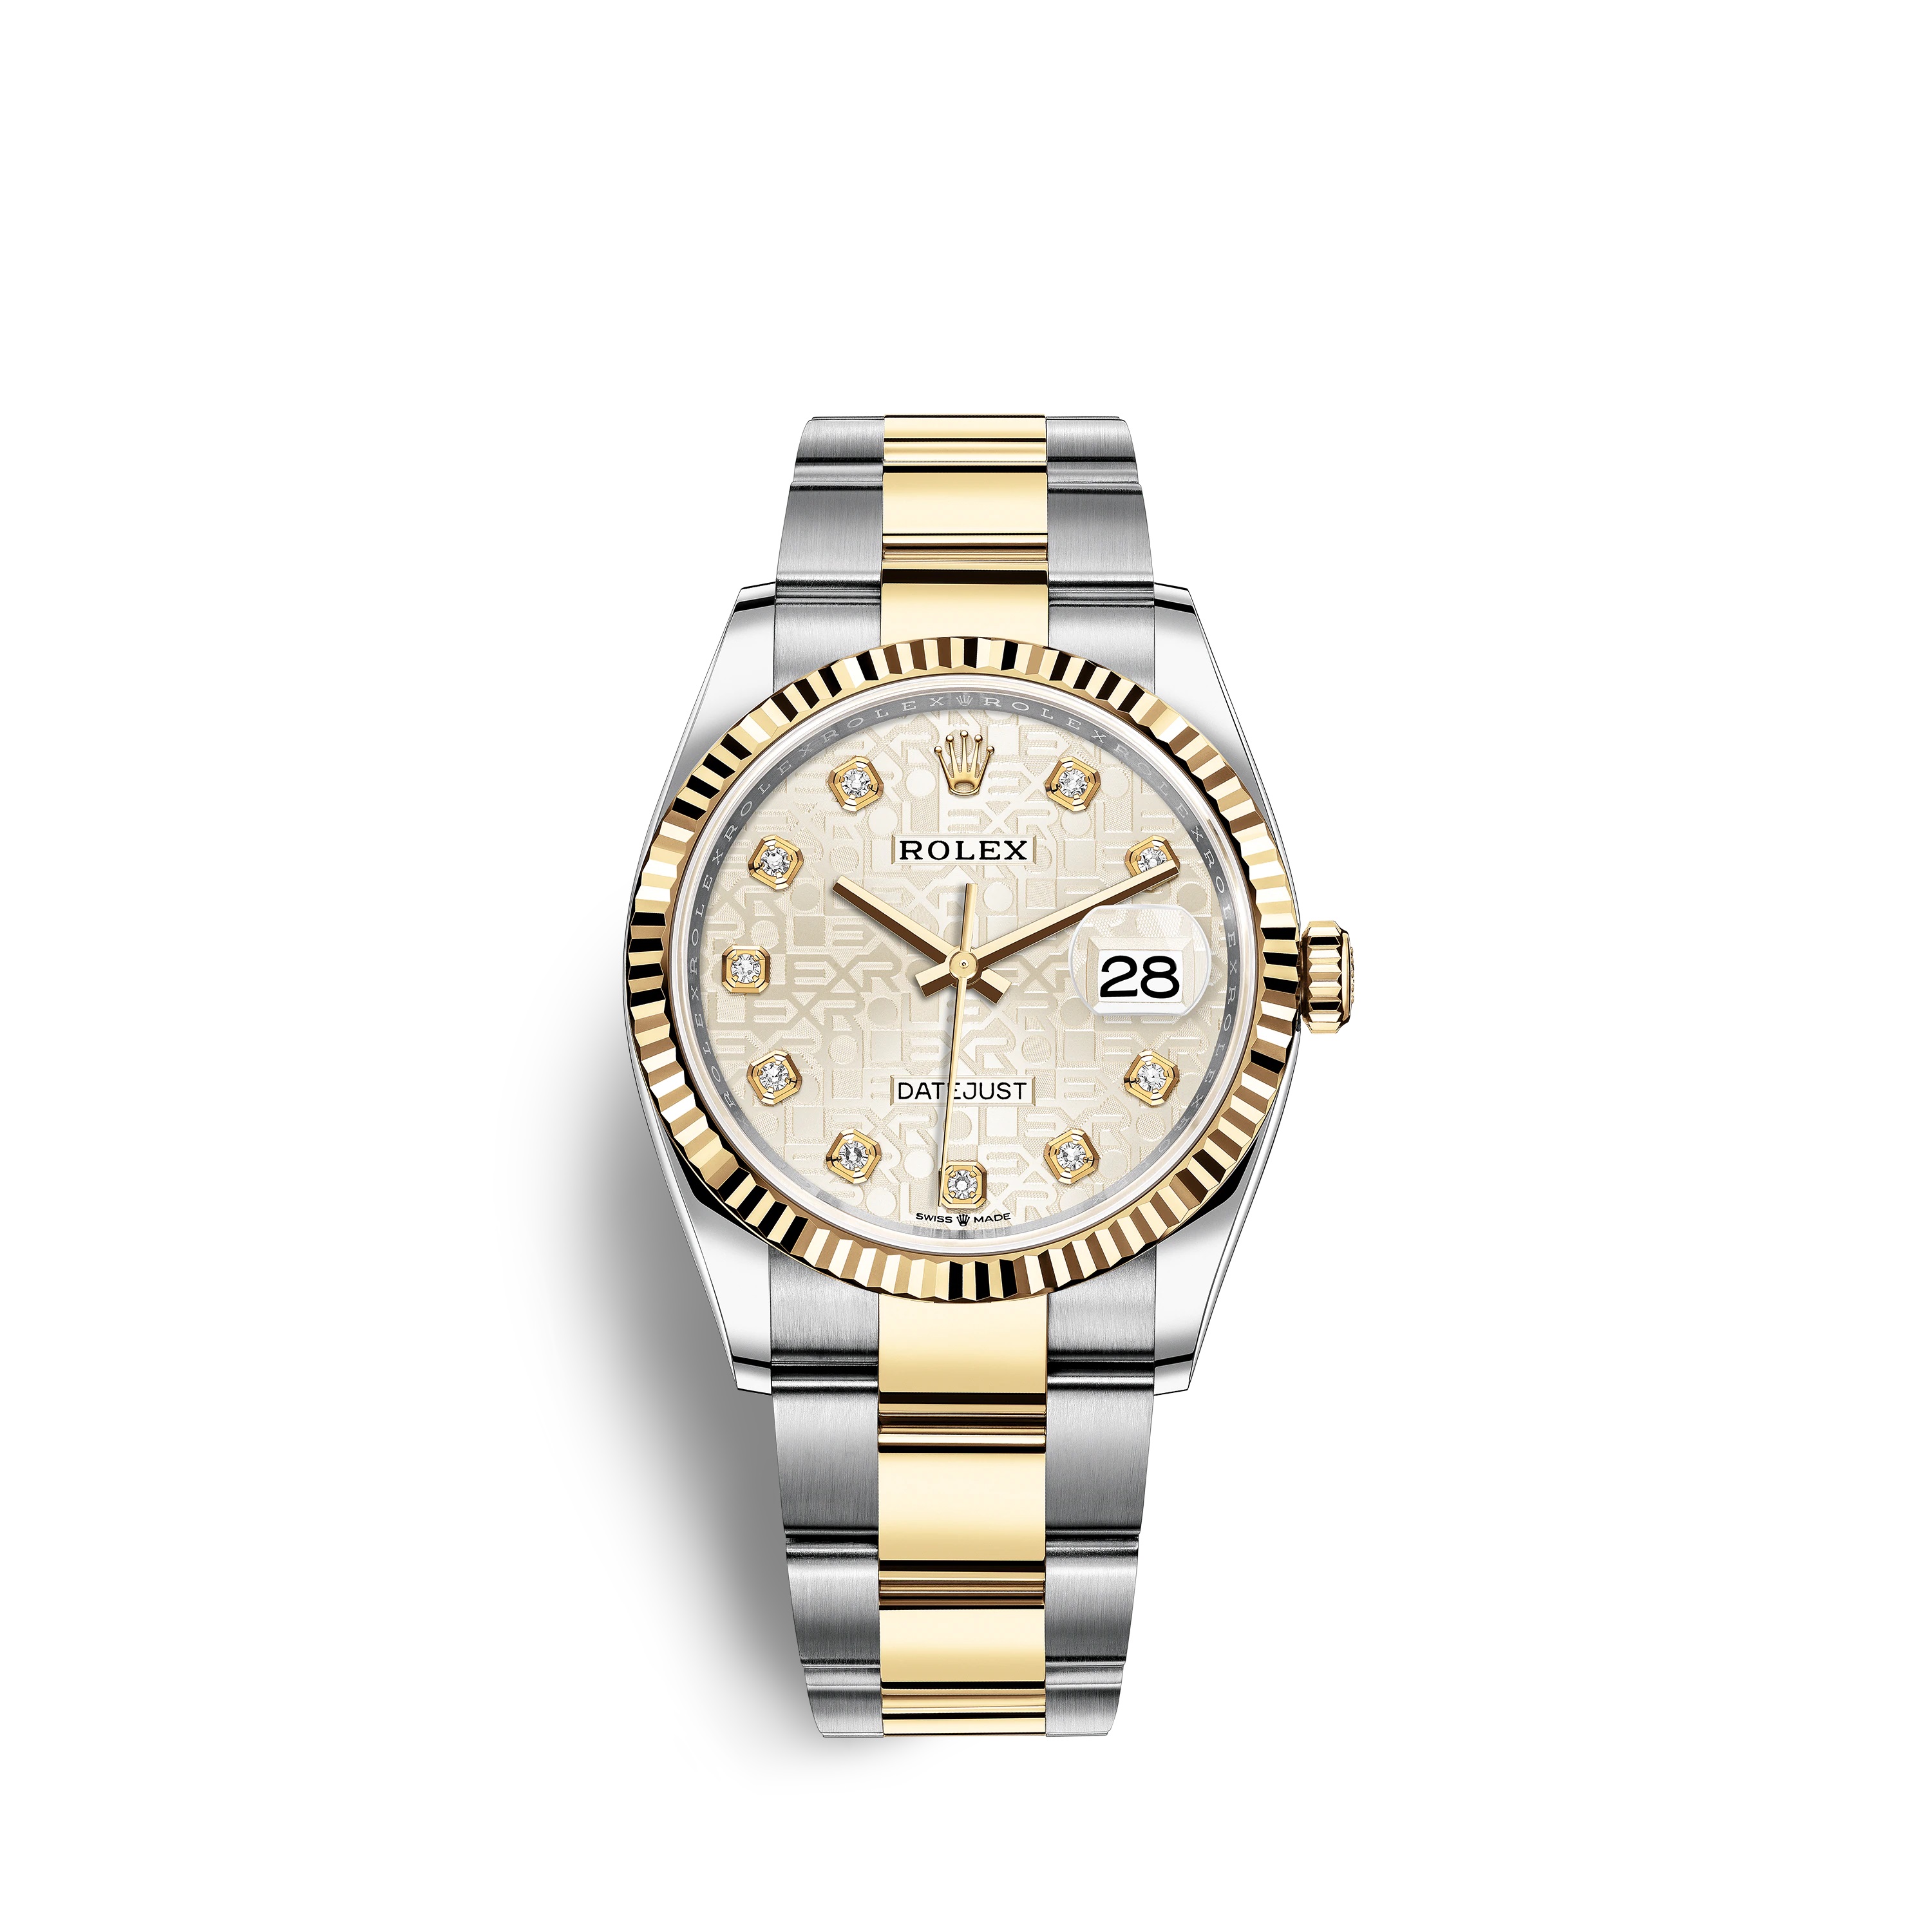 Datejust 36 126233 Gold & Stainless Steel Watch (Silver Jubilee Design Set with Diamonds)